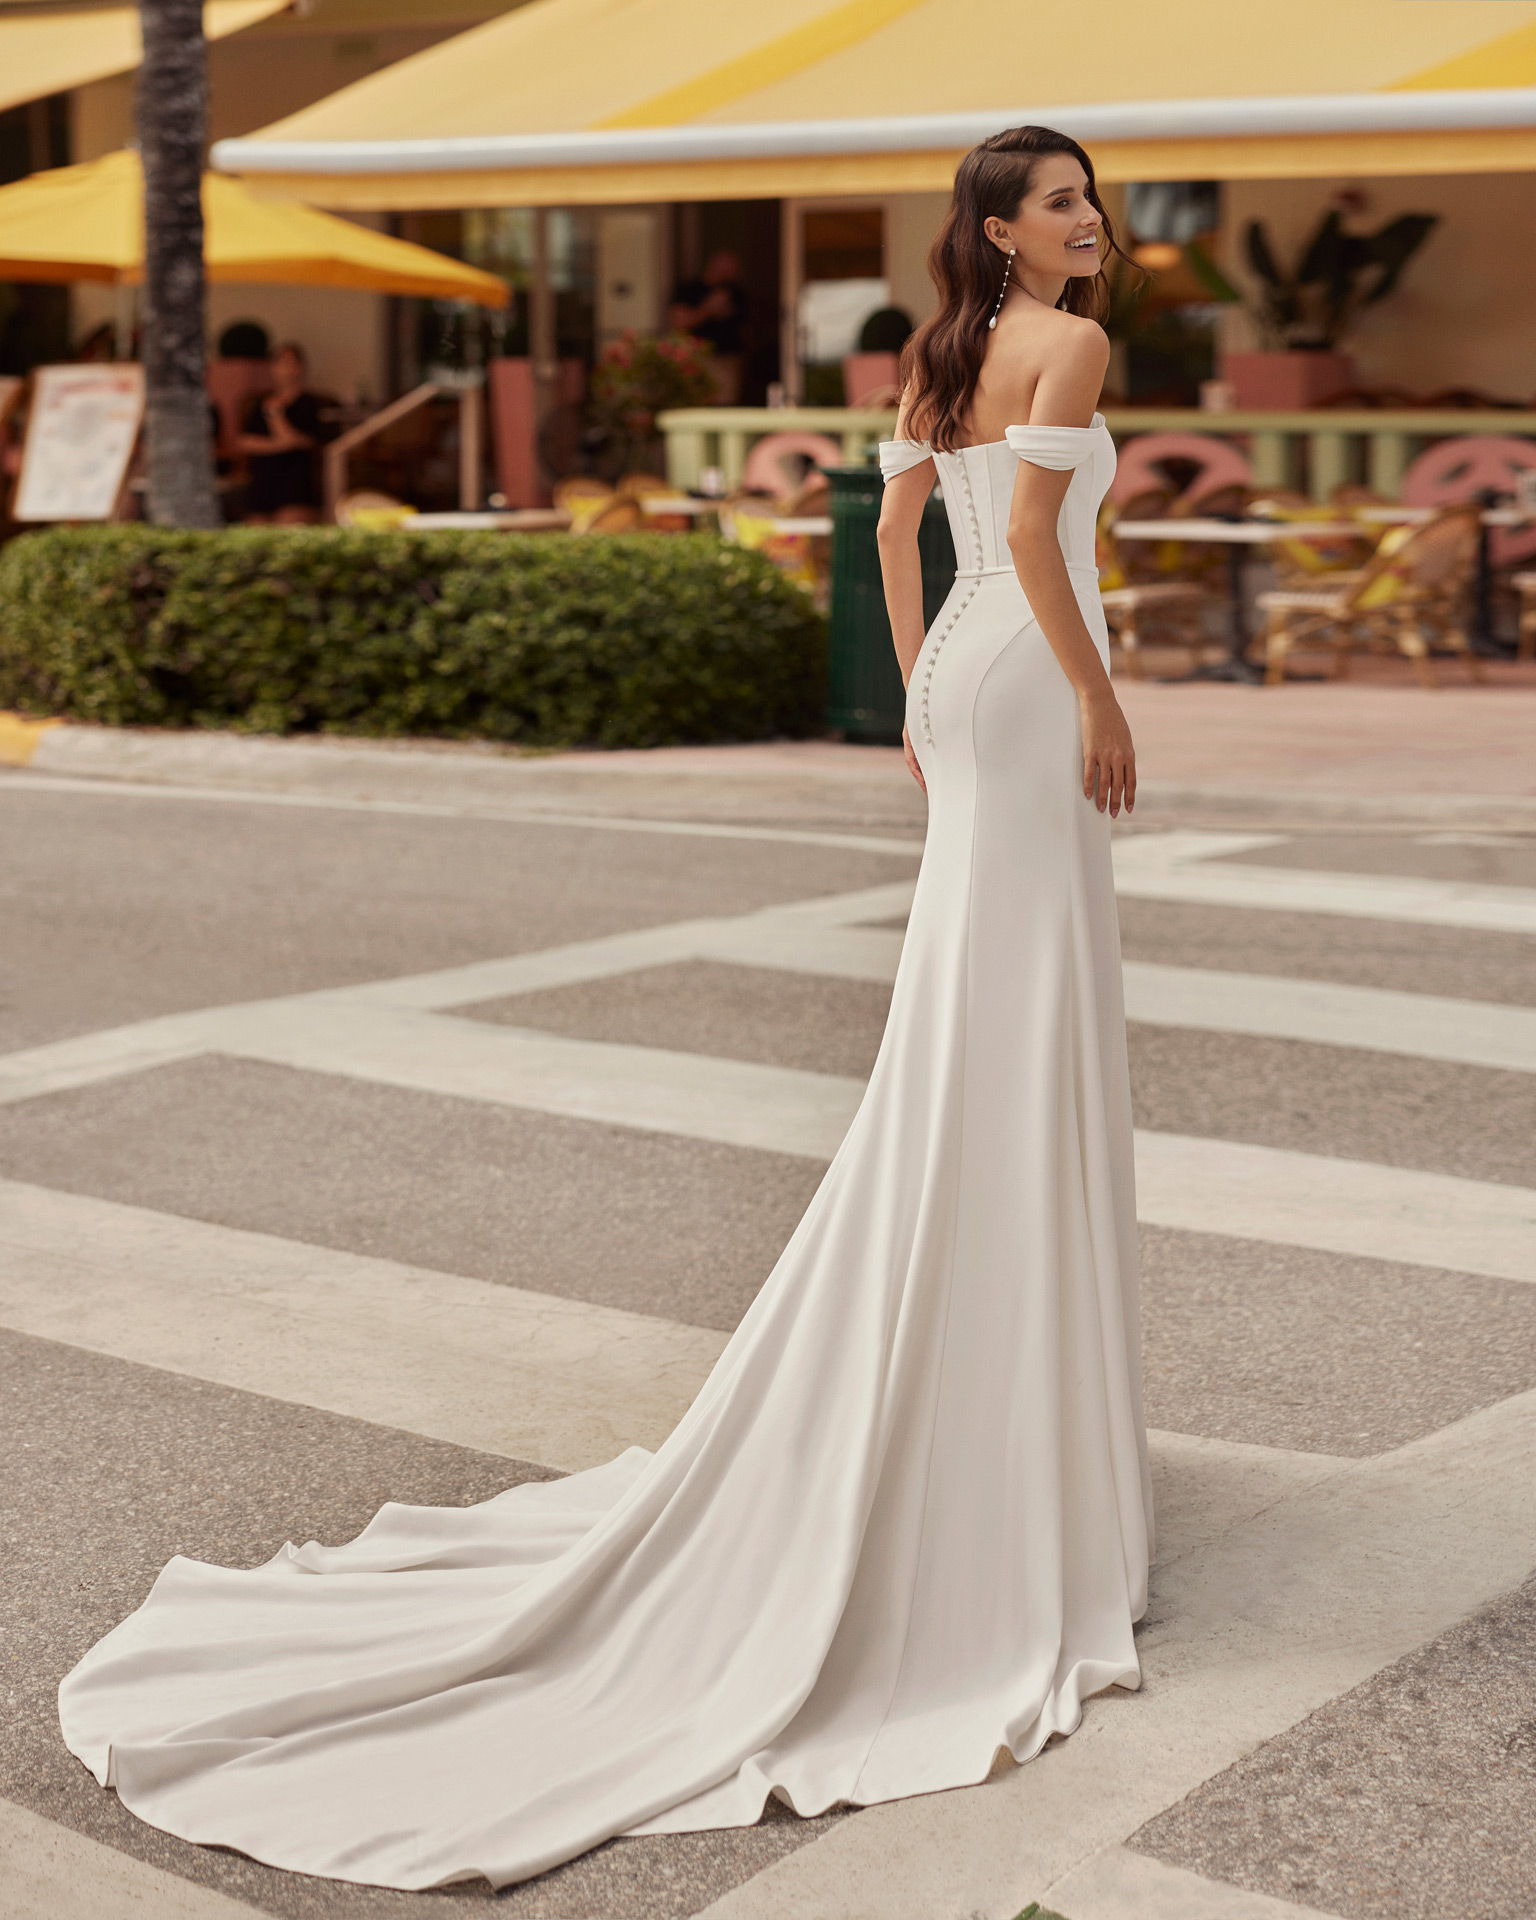 Elegant mermaid wedding dress, made in crepe. This on-trend Luna Novias design features a sweetheart neckline, buttoned back, detachable straps, and a crepe skirt with a front slit. LUNA_NOVIAS.